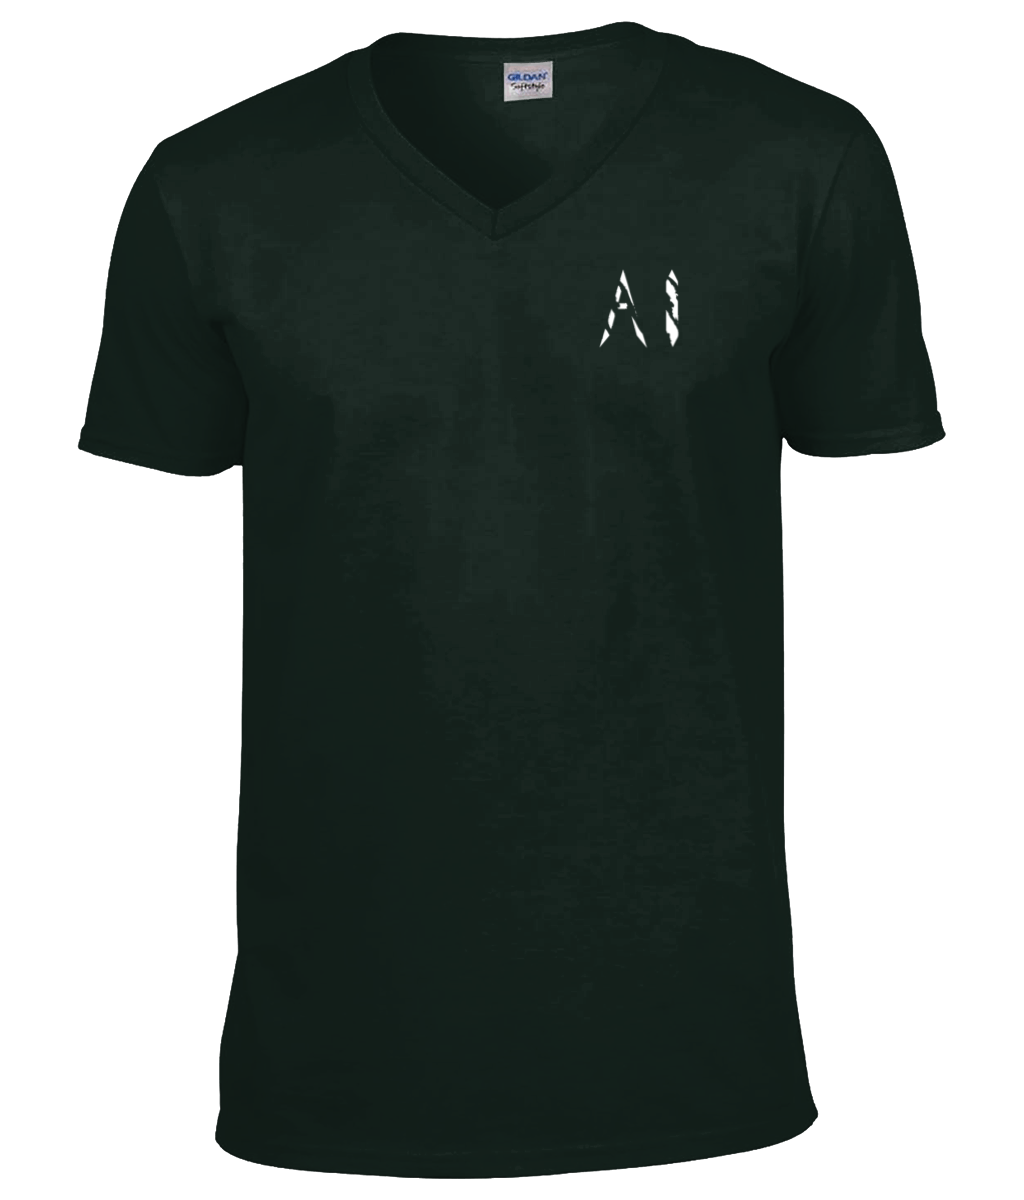 Womens Forrest green Classic V Neck T-Shirt with black AI logo on left breast